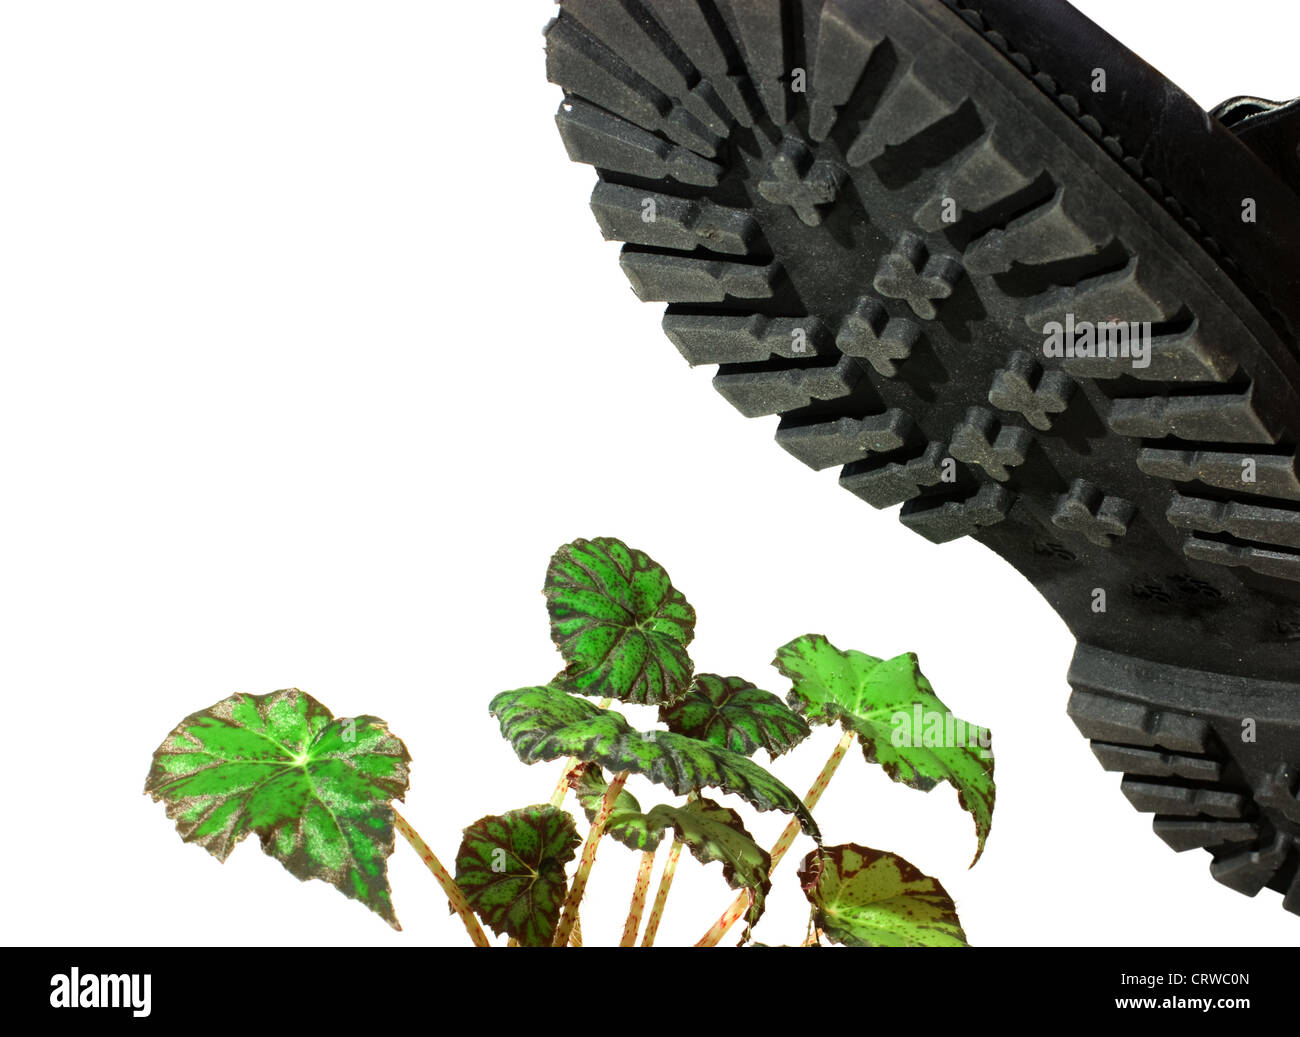 brute military boots and plant Stock Photo